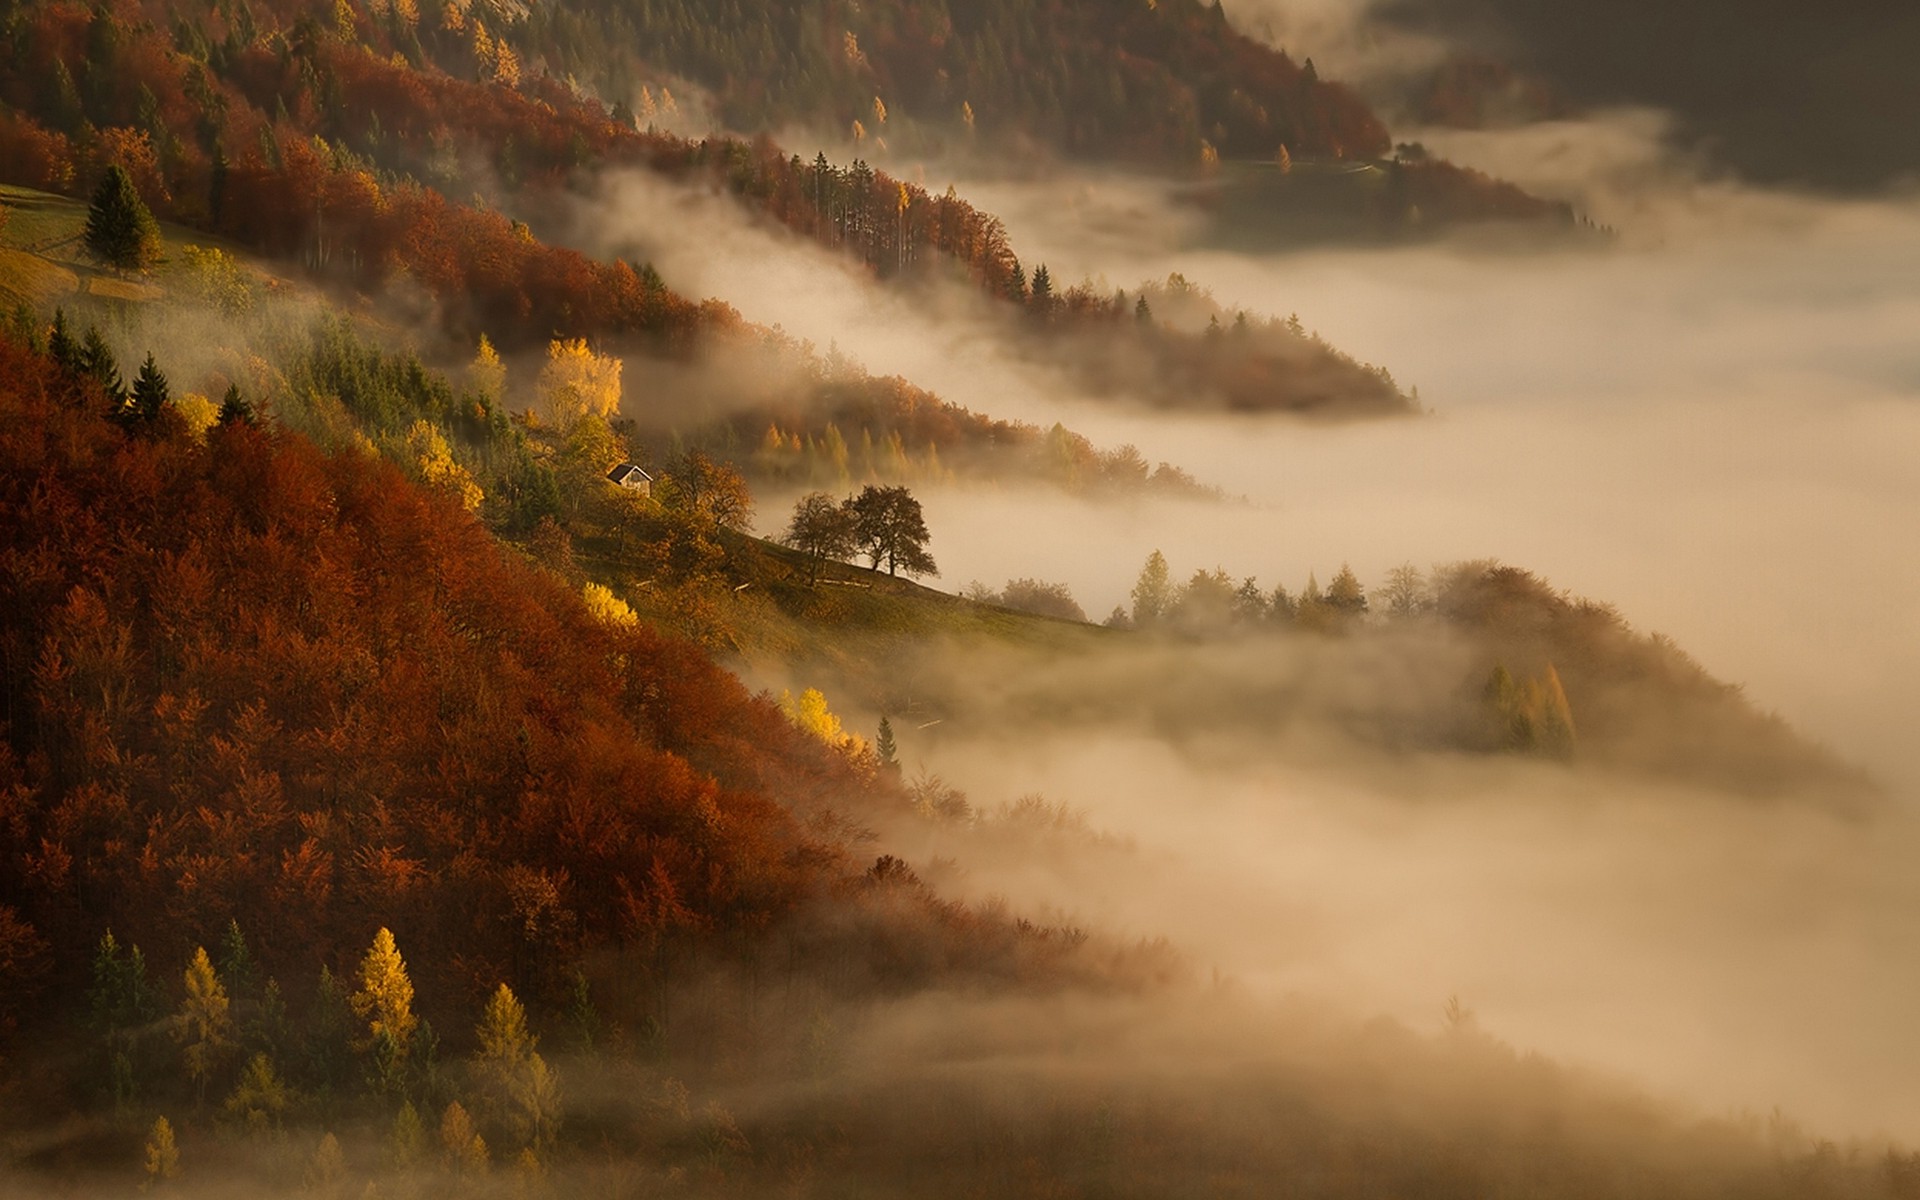 mist, Nature, Sunrise, Landscape, Morning, Fall, Mountain, Forest, Cottage, Trees Wallpaper